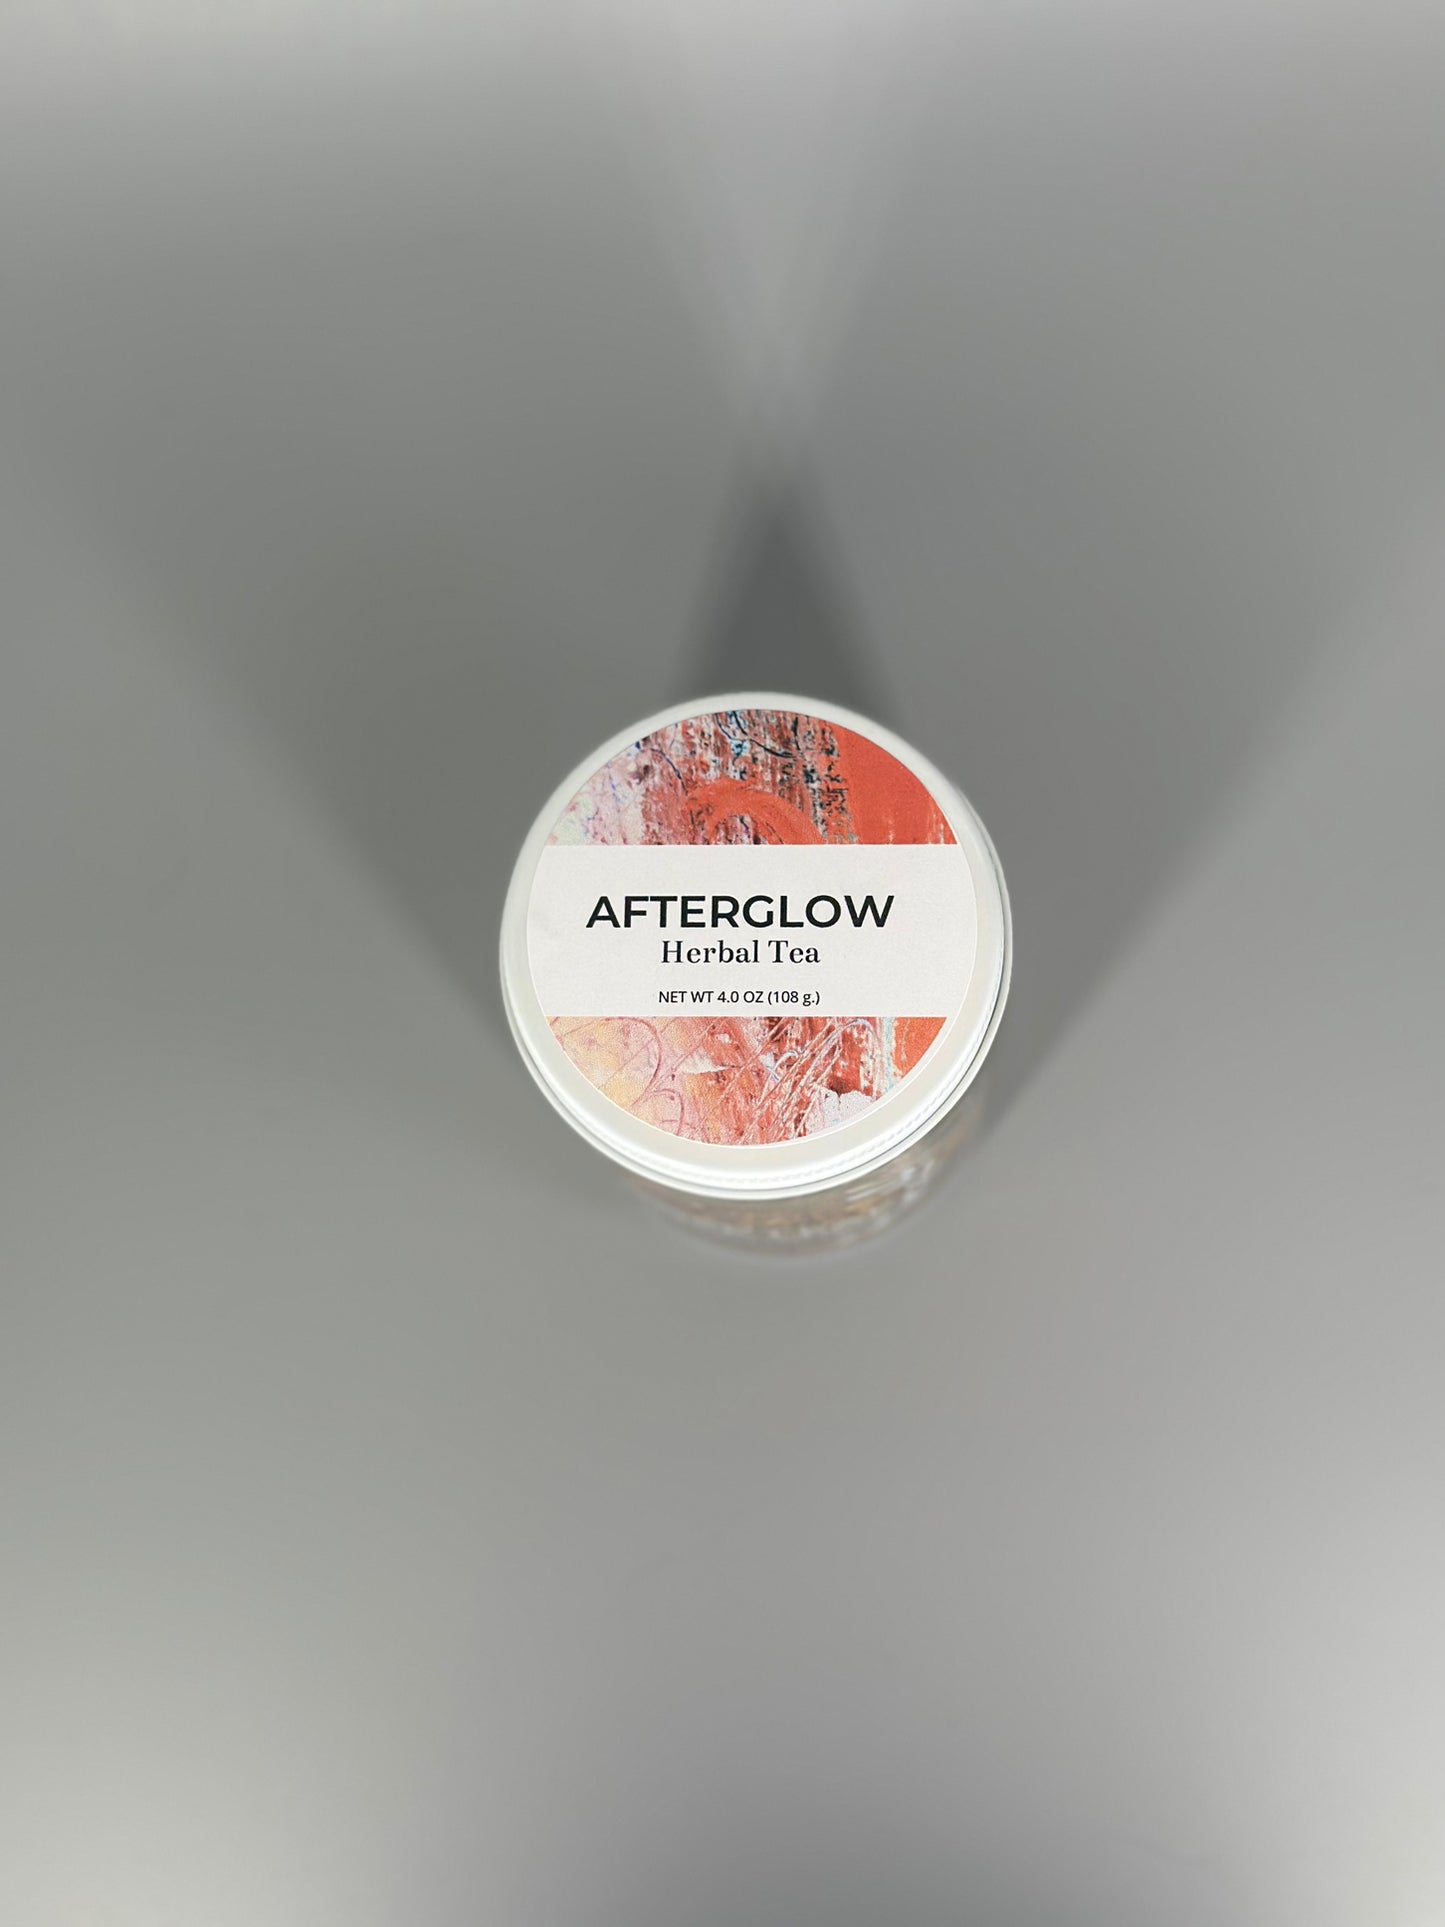 Chicory Tea Co.'s Afterglow Herbal Tea in jar, view from top